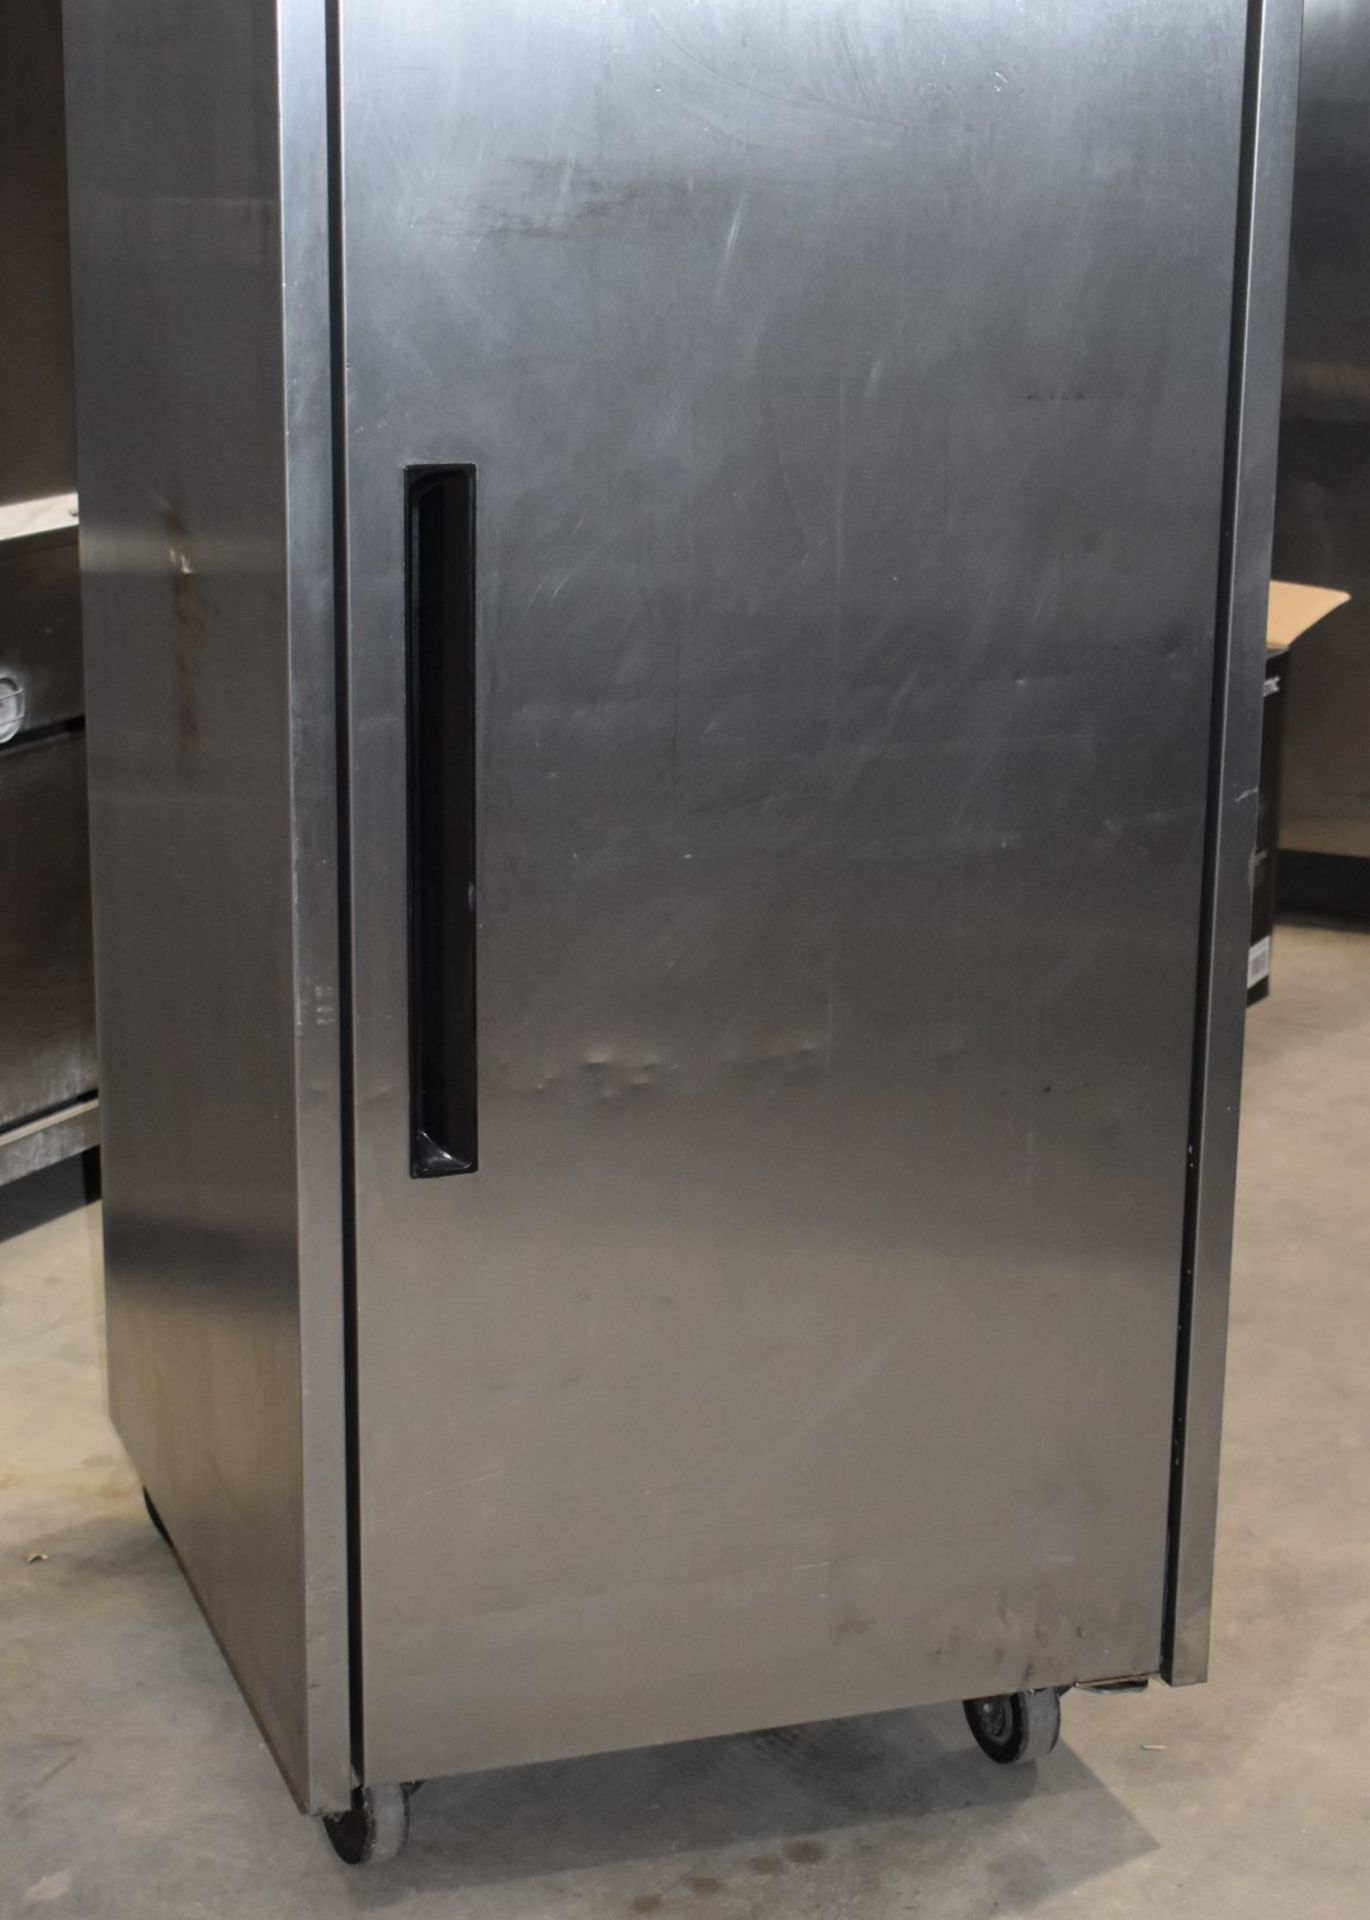 1 x Williams Upright Single Door Refrigerator With Stainless Steel Exterior - Model HJ1SA - Recently - Image 2 of 11